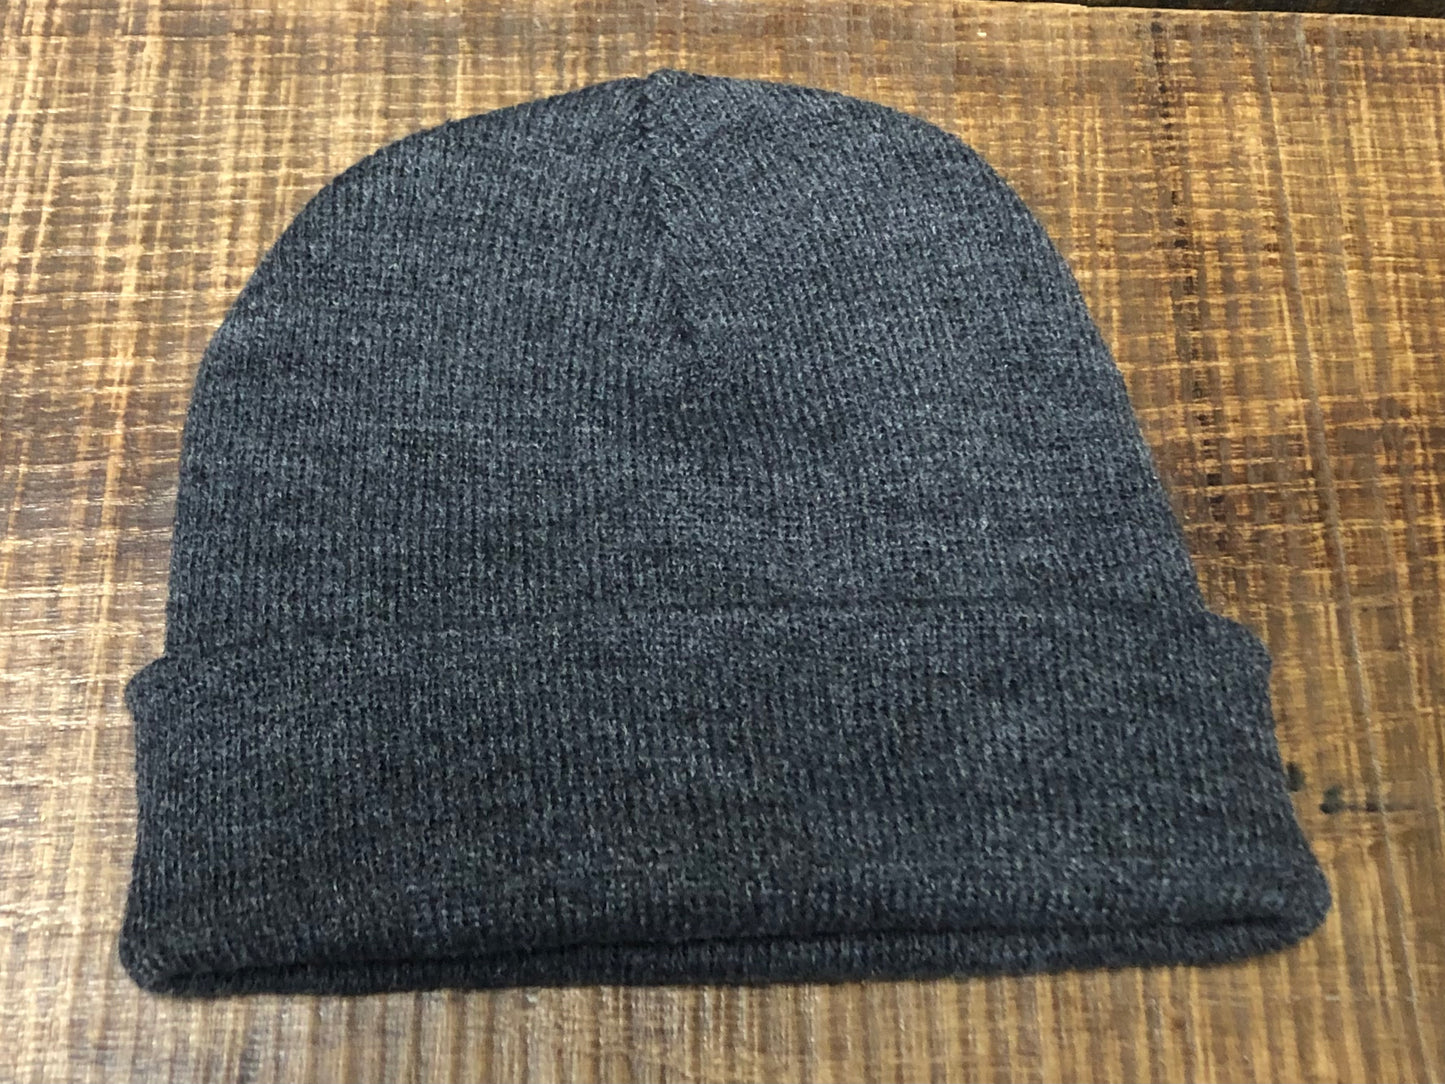 BEANIES (youth)